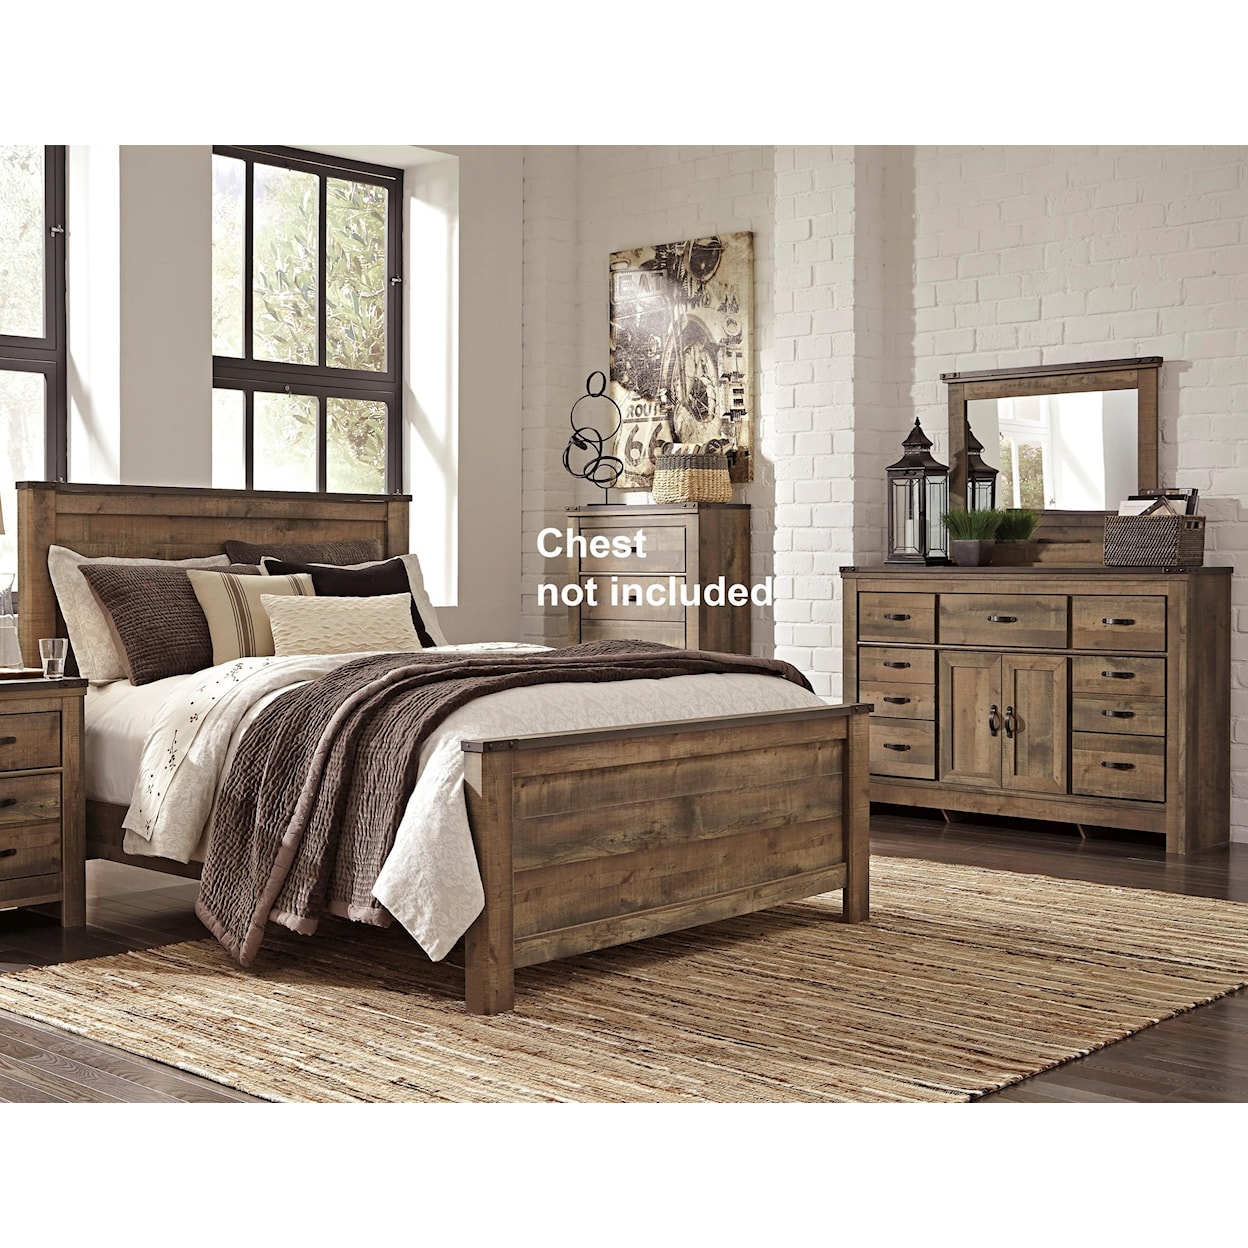 Signature Design by Ashley Trinell King Bedroom Group